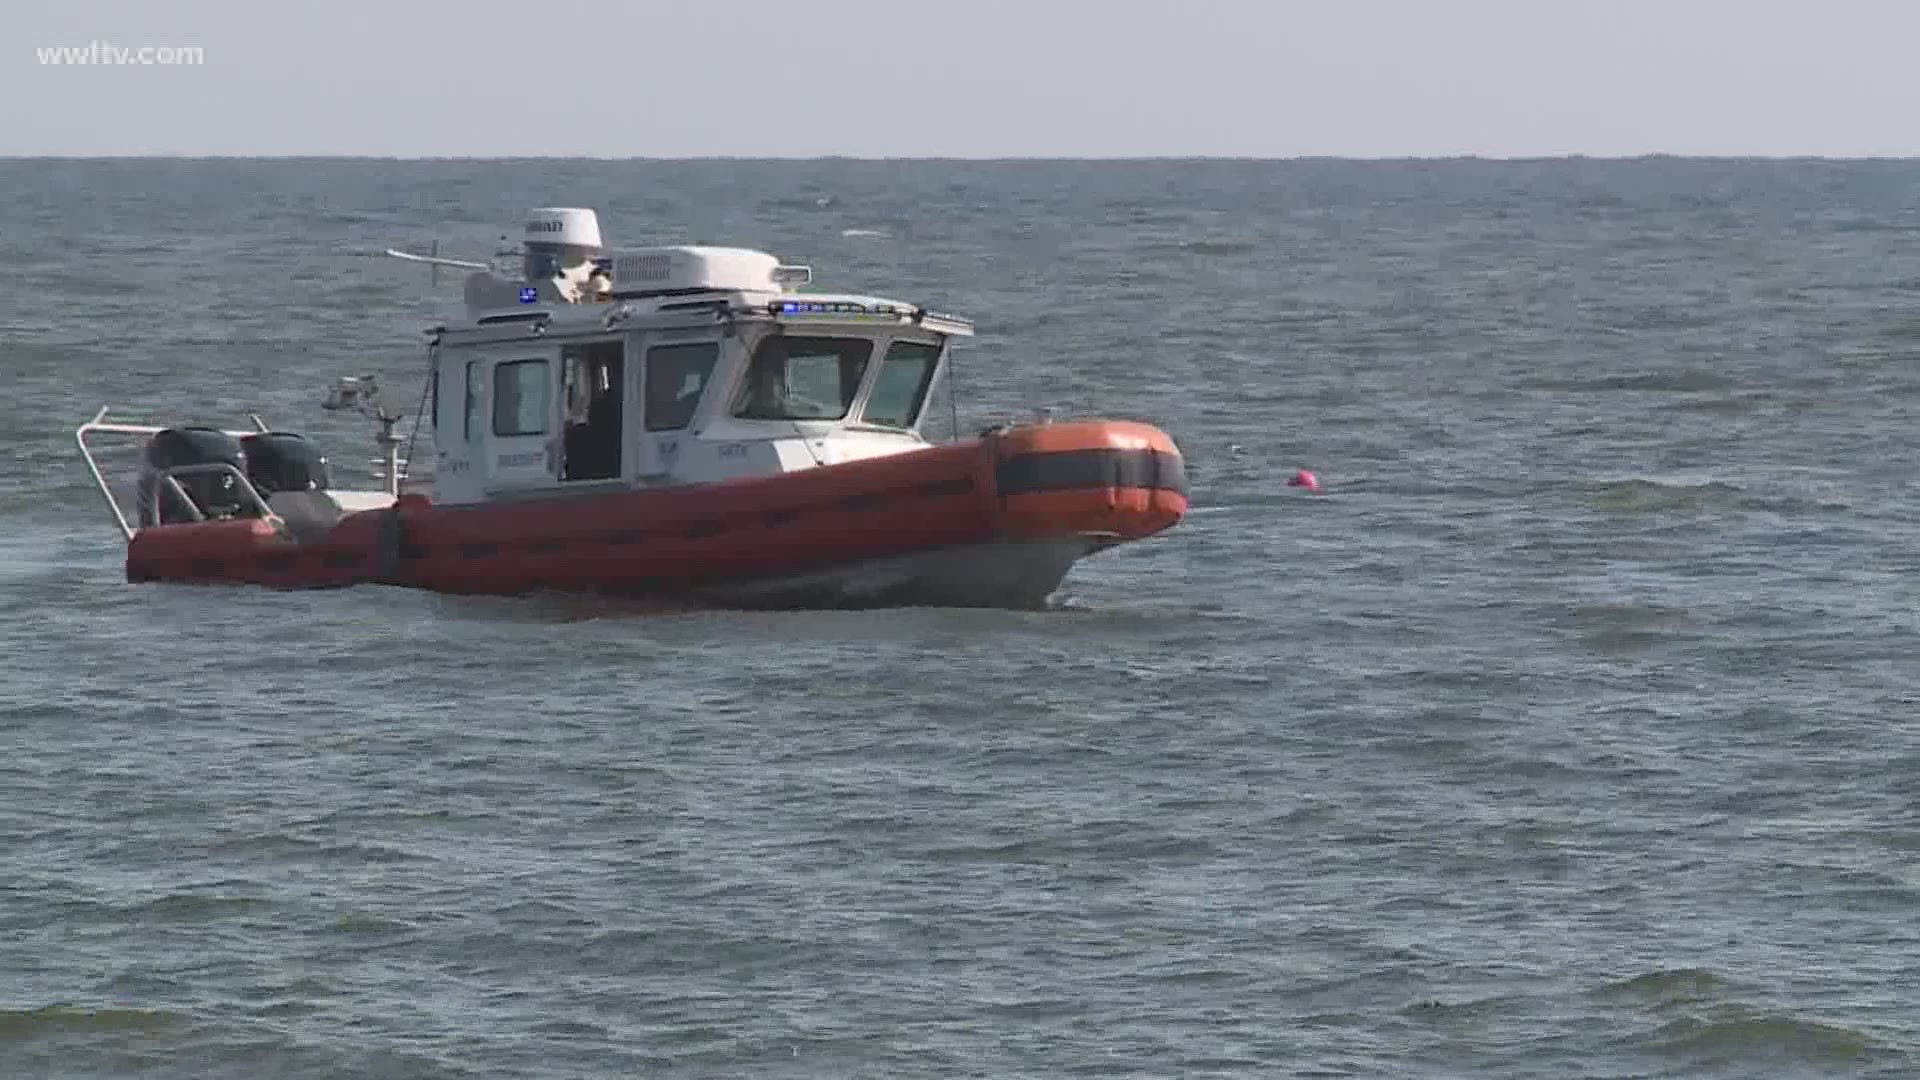 A body has been found in Lake Pontchartrain in the area where a kayaker was seen struggling before the kayak turned over.